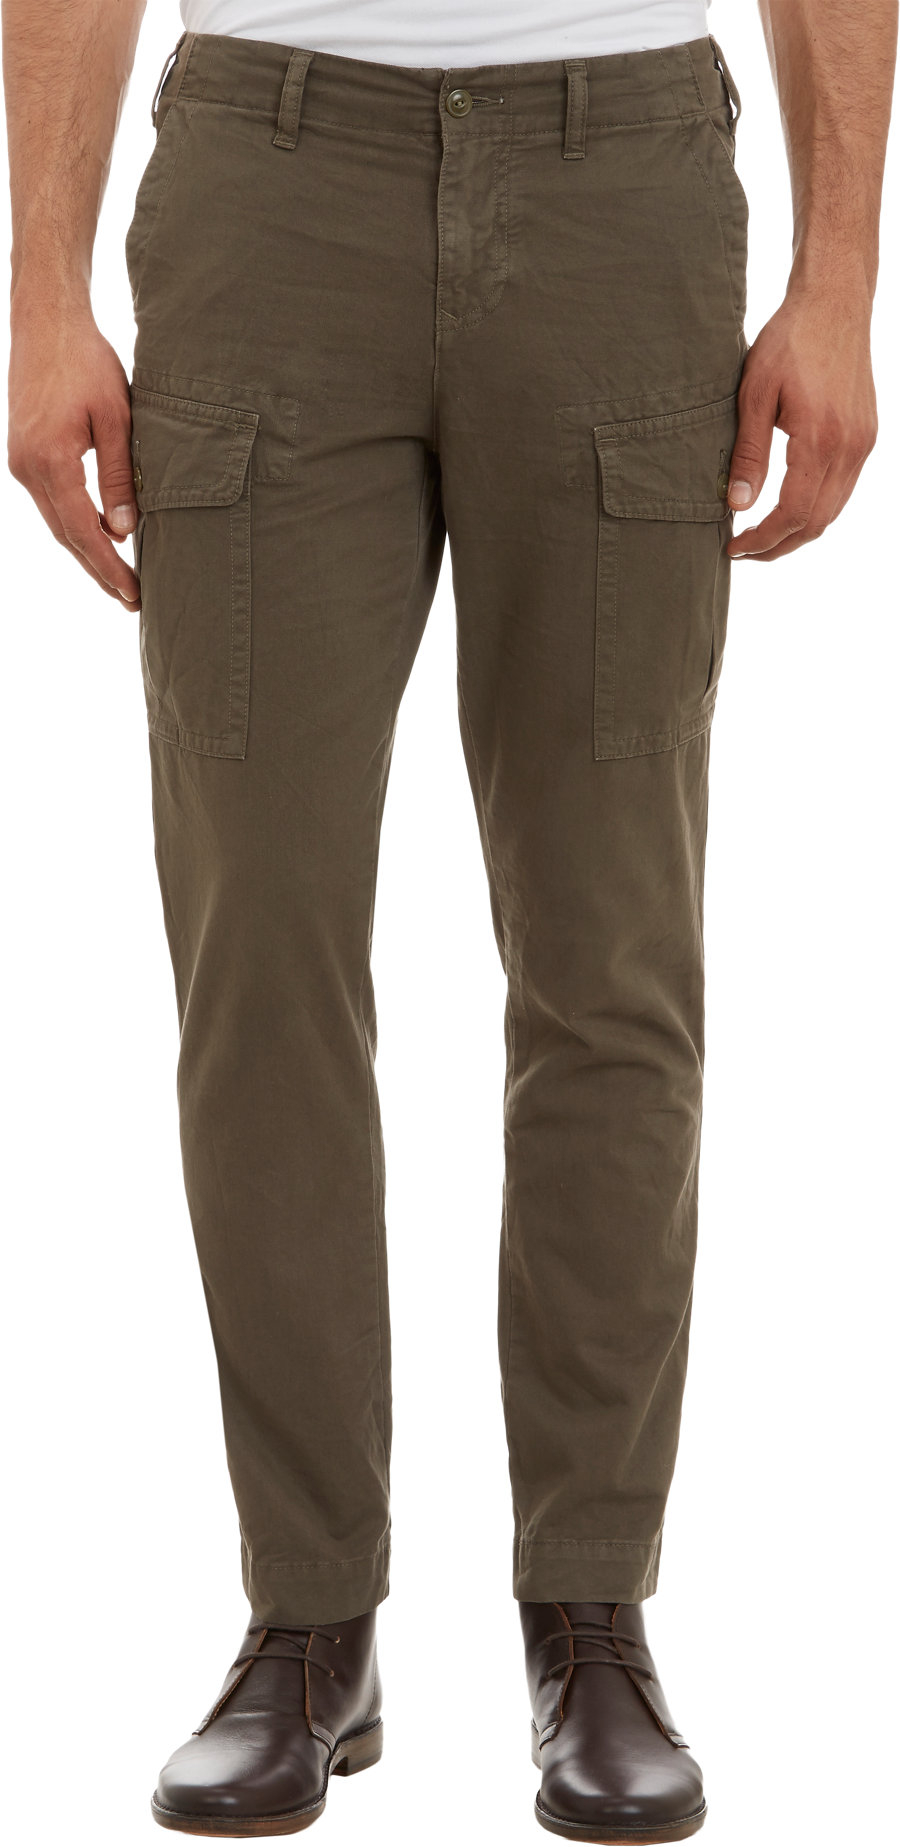 Lyst - Save Khaki Cargo Pants in Green for Men